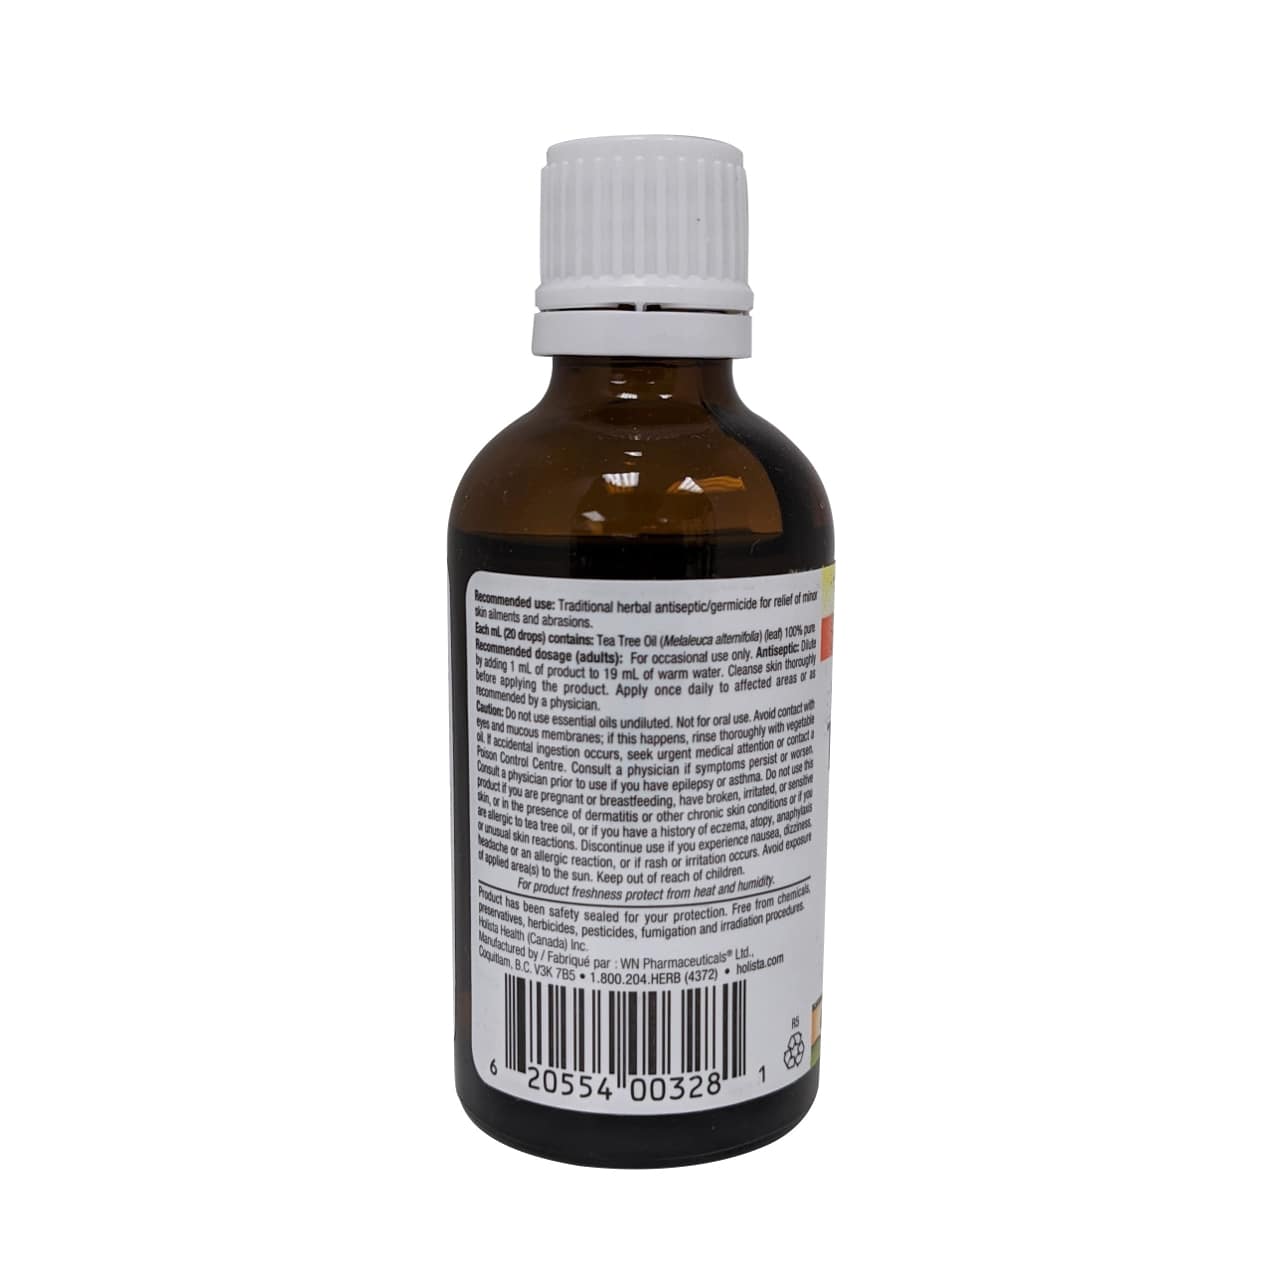 Product use, ingredients, and details for Holista Tea Tree Oil 100% Pure in English